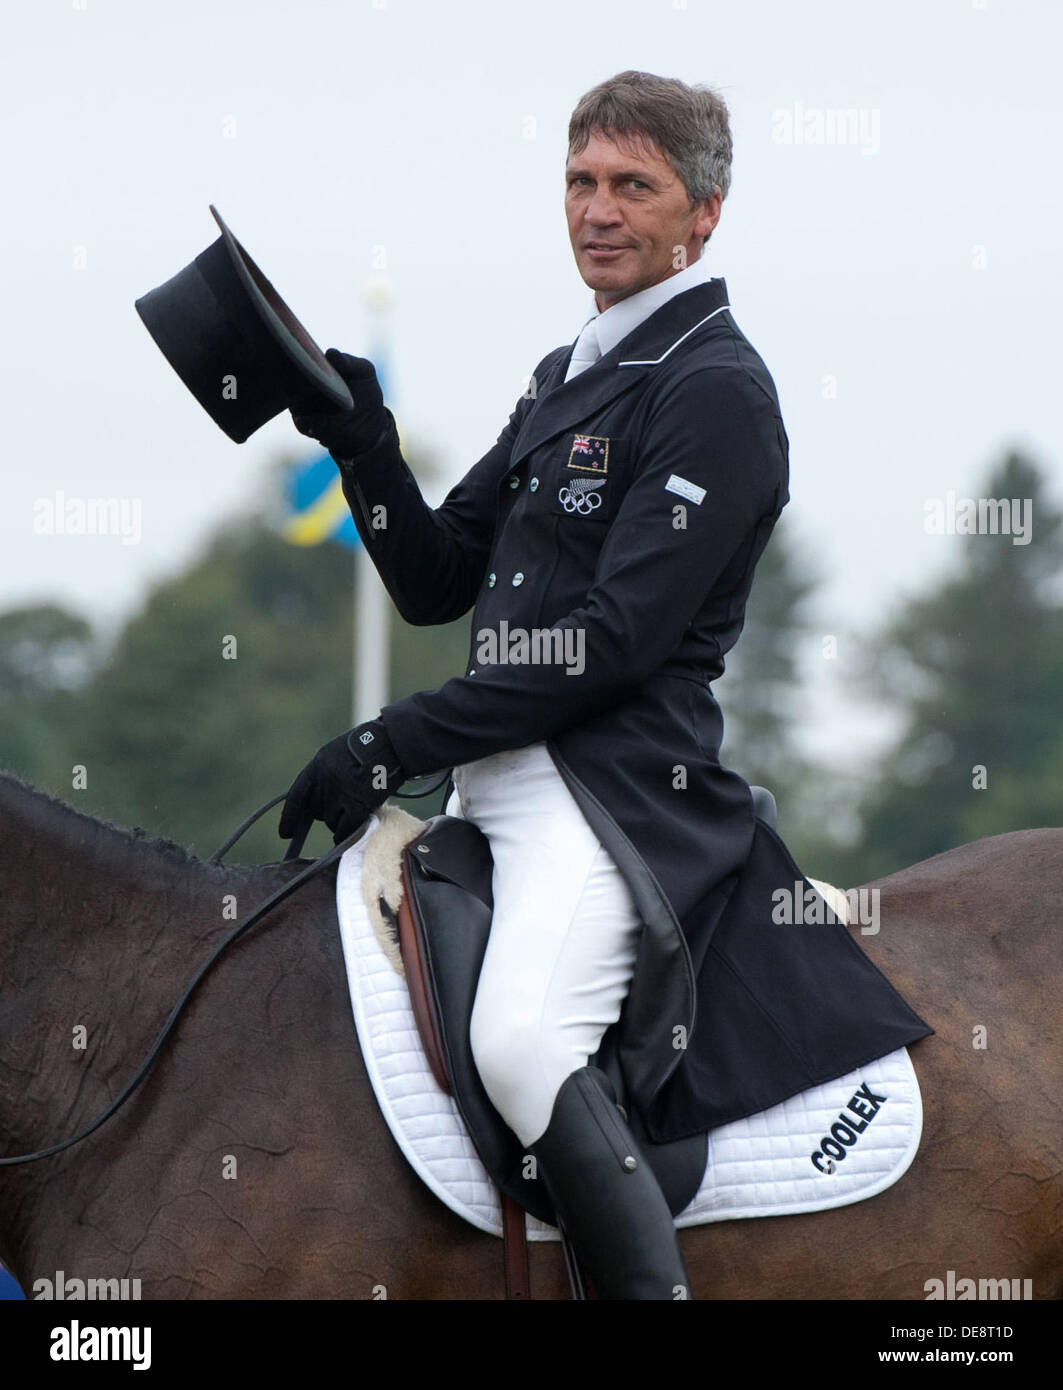 2013 Fidelity Blenheim Palace Horse Trials. Woodstock Oxford, England. Friday 13th September. Andrew Nicholson (NZL) with Viscount George  during the dressage phase CCI*** three day event Credit:  Julie Badrick/Alamy Live News Stock Photo